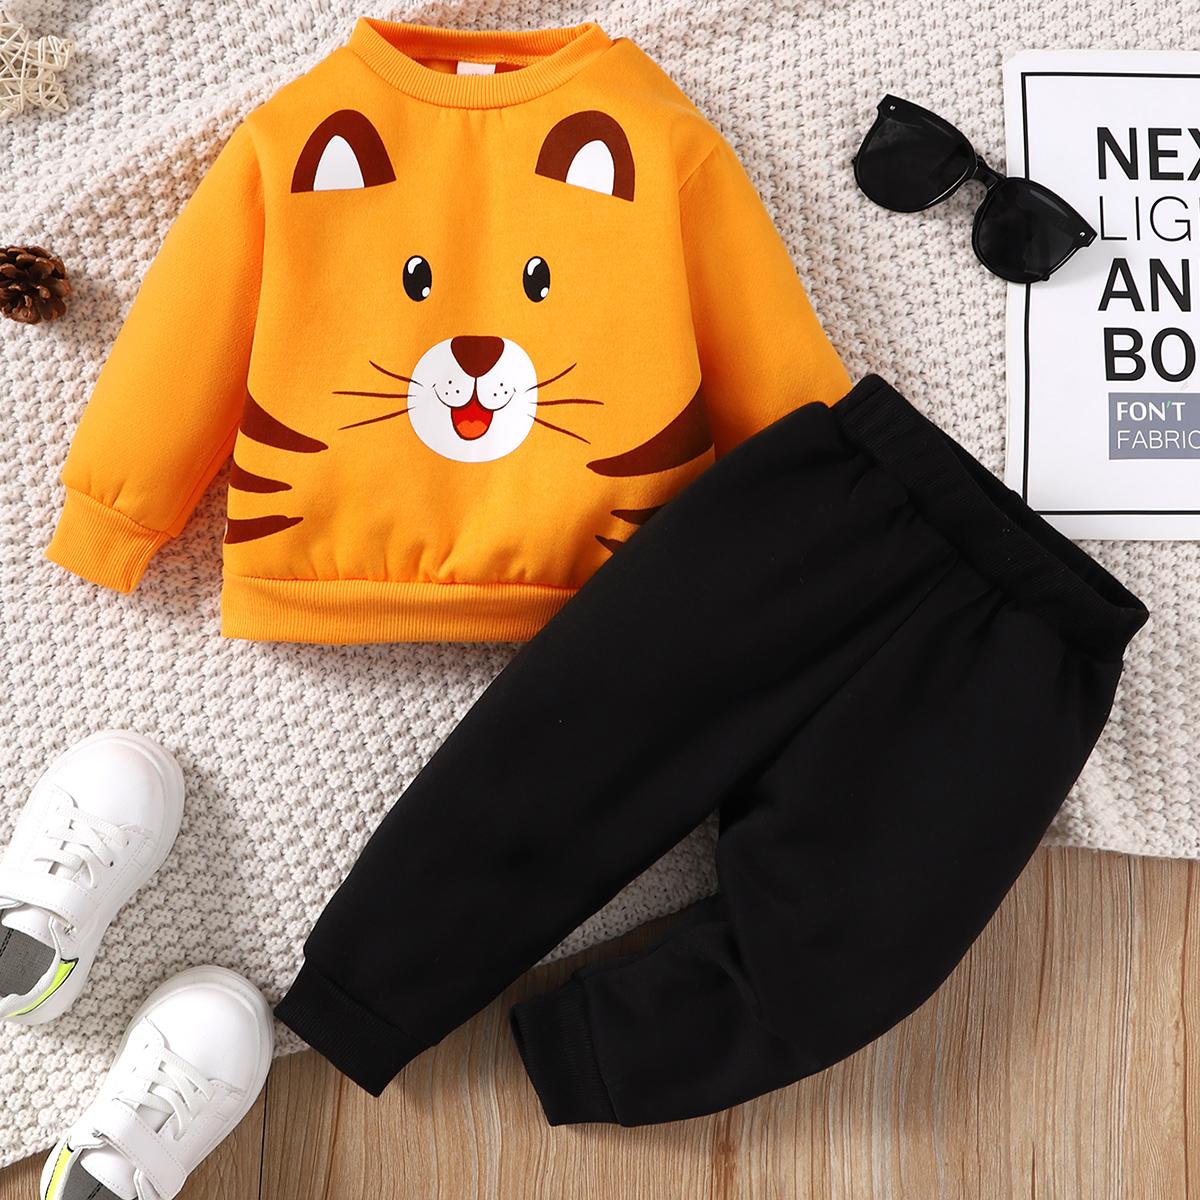 6M-3Y kid fashion Boys Outfits Cat Long Sleeve Winter Tops Elastic Pants 2Pcs Clothes Set Yellow Catpapa GS112208456